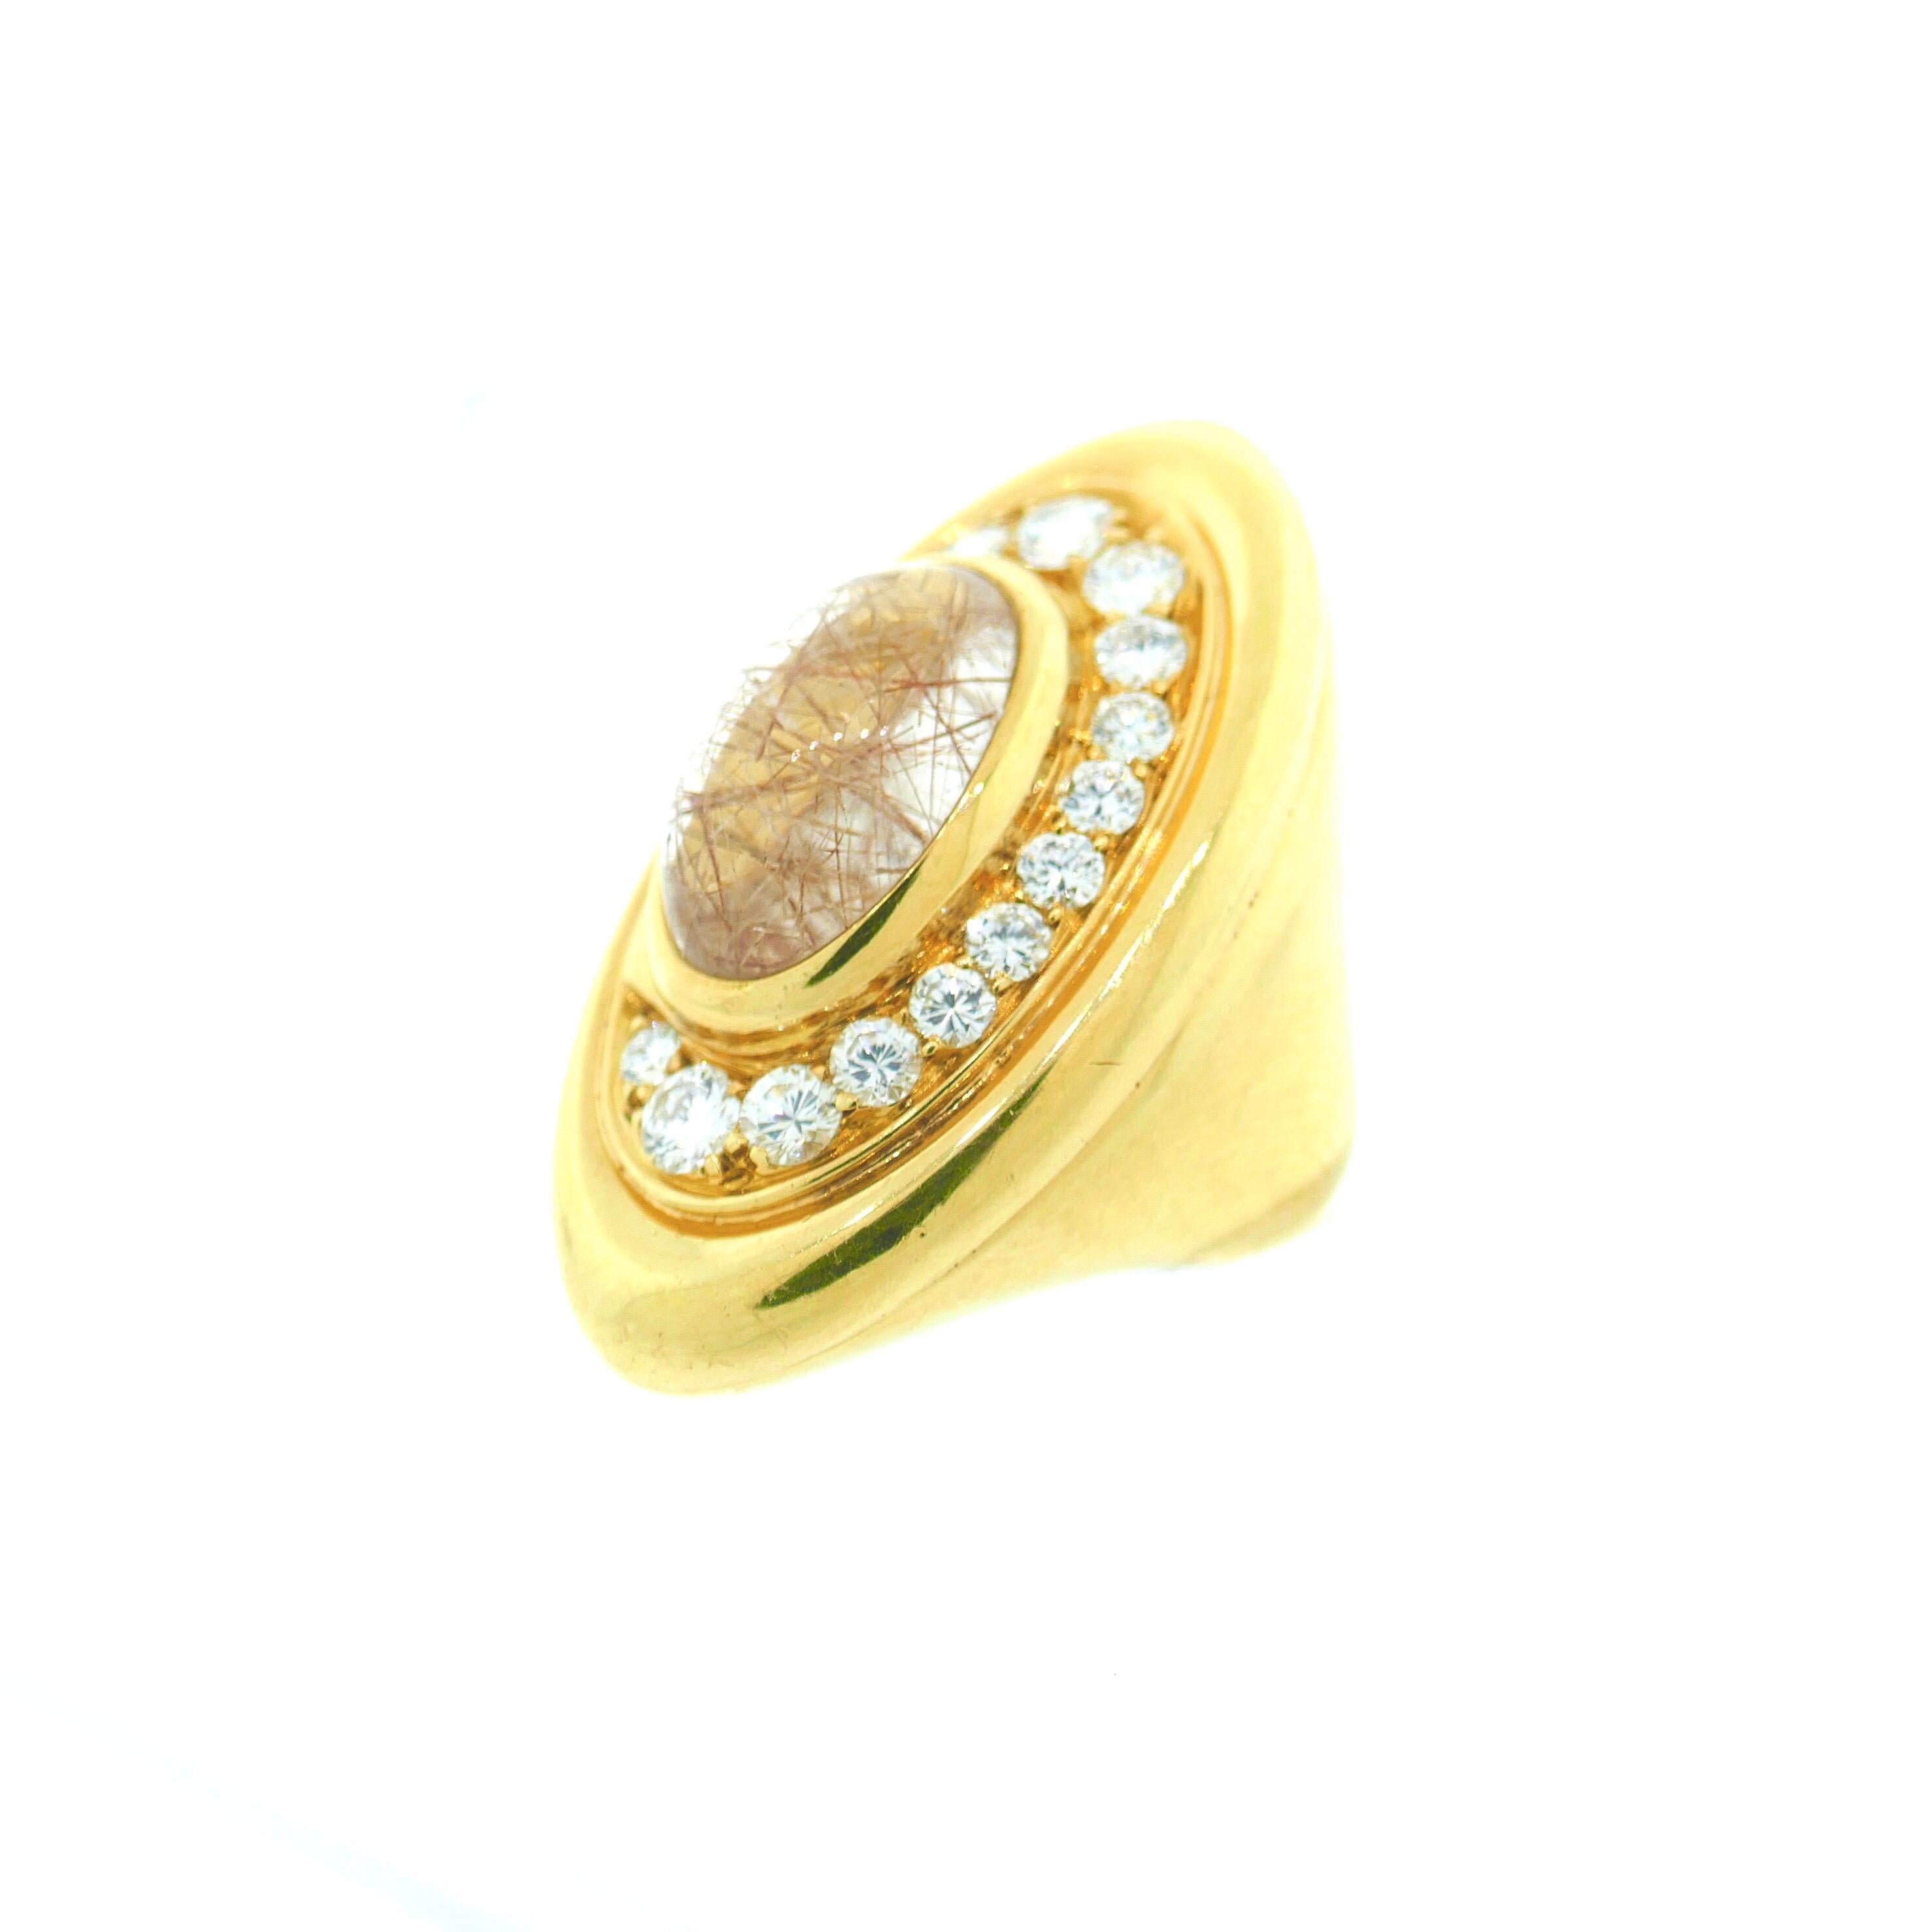 Bvlgari Yellow Gold, Quartz, and Diamond Ring

This is an iconic vintage Bvlgari design. It features 18k yellow gold, stunning quartz, and lively excellent quality diamonds. This ring will come with the original Bvlgari box. 

Size: 5 (US) 

Weight: